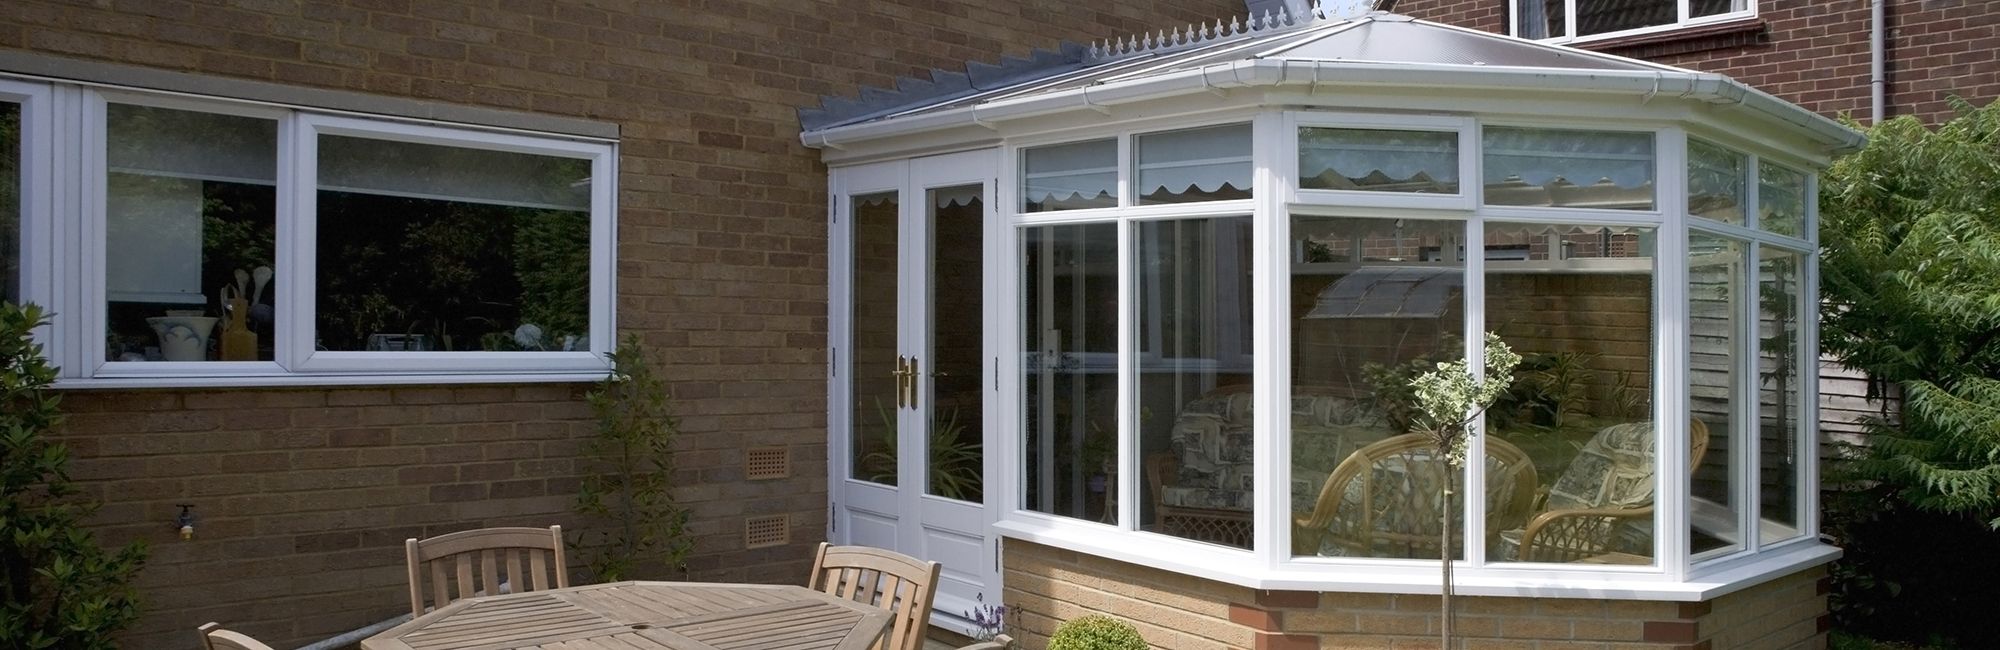 Conservatories & Extensions